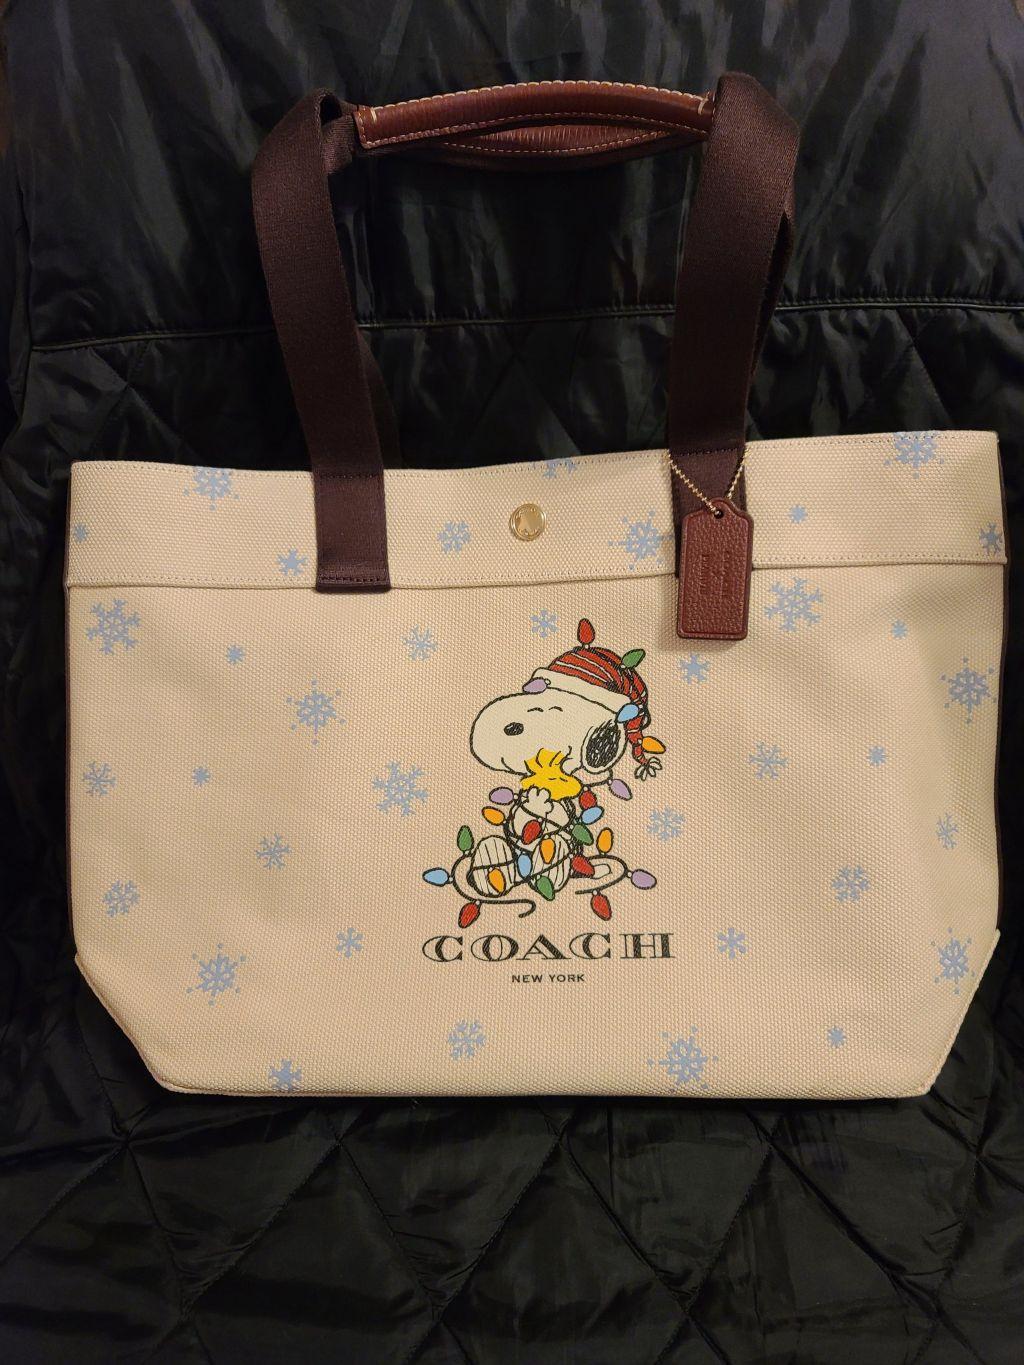 Coach Snoopy Large Canvas Tote